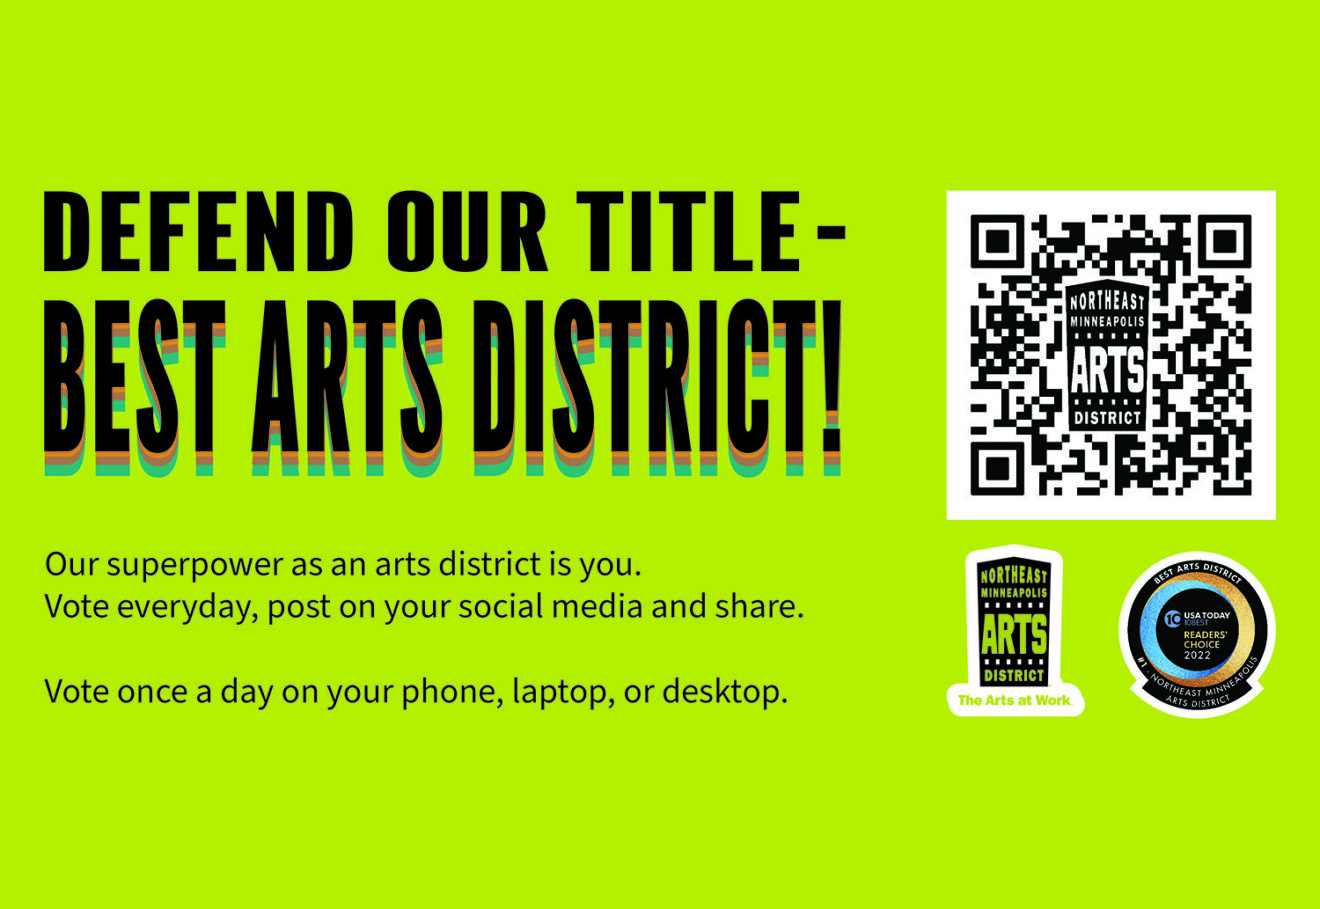 Counting down to Arts District voting deadline